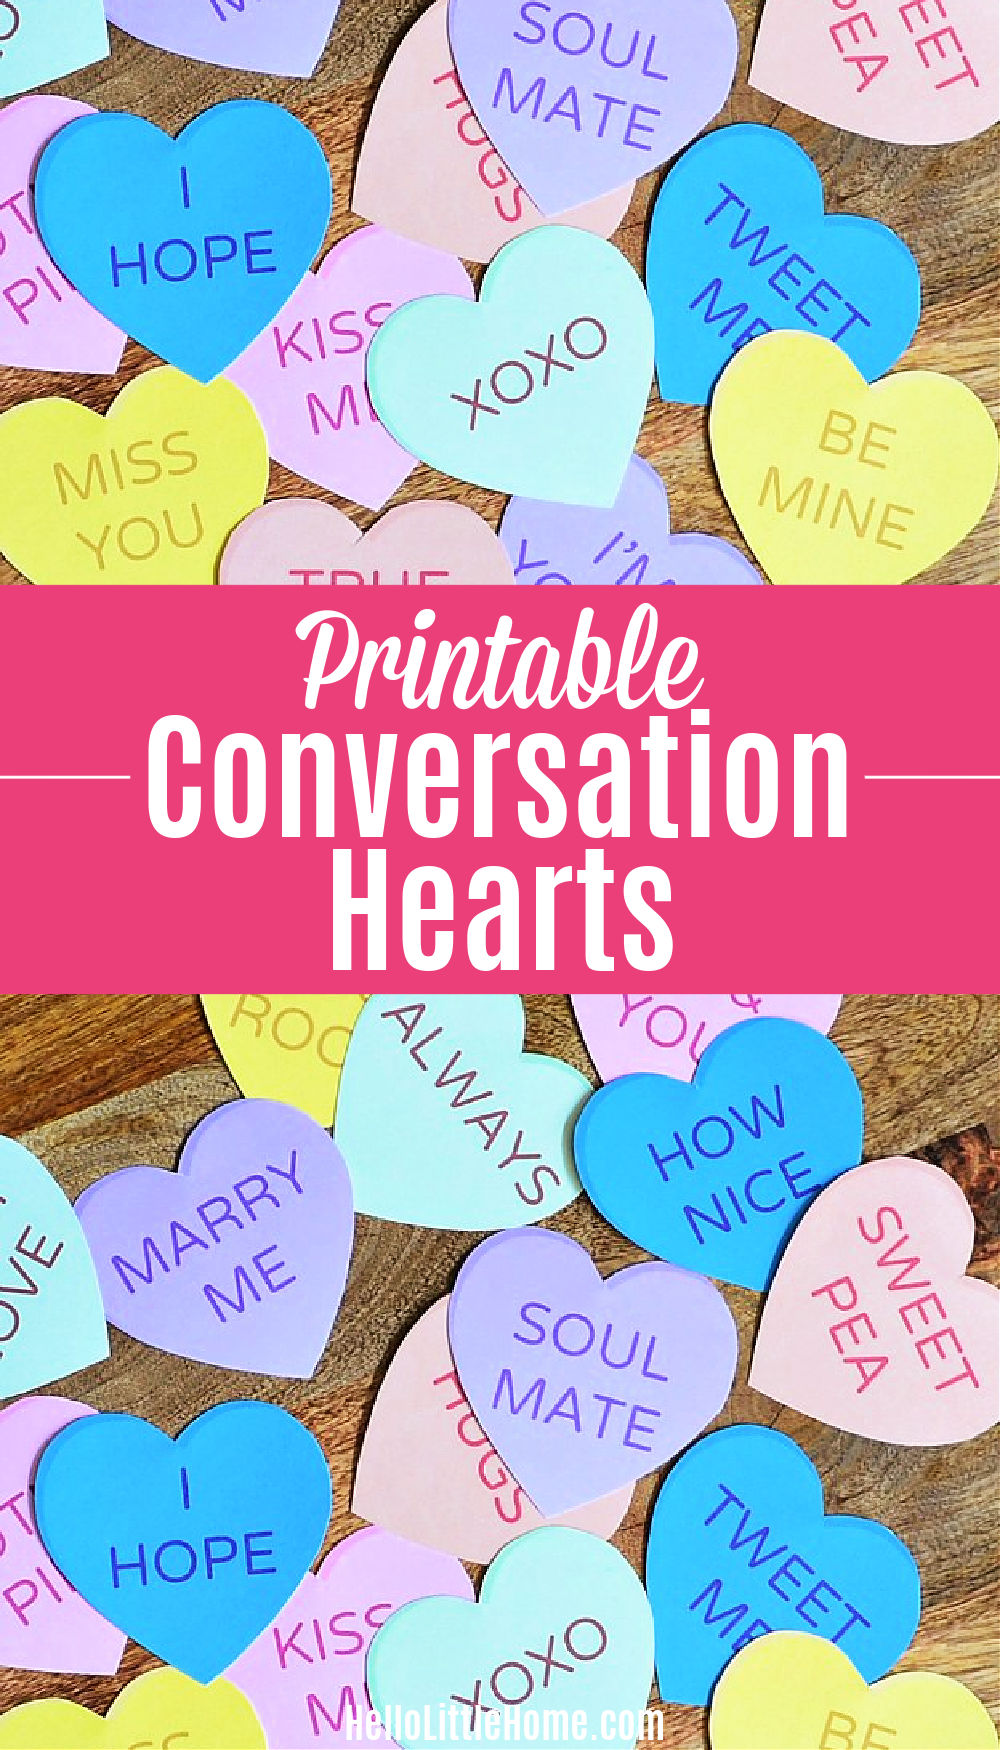 Printable Conversation Hearts on a wood table.